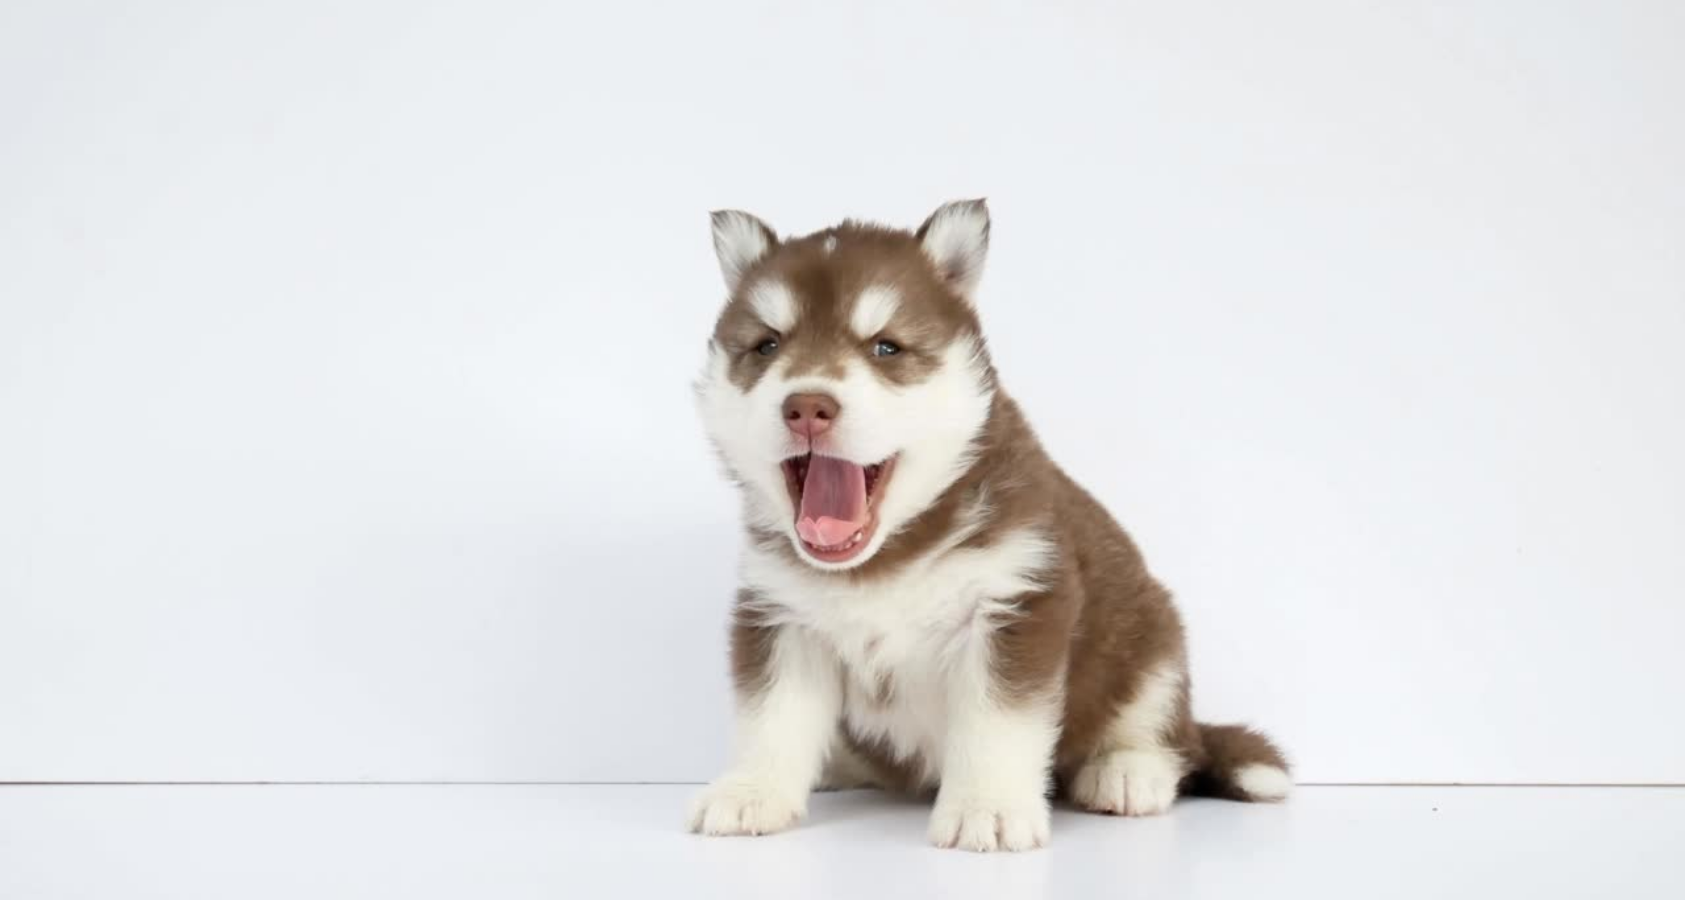 Baby Husky Puppies - What You Need To Know